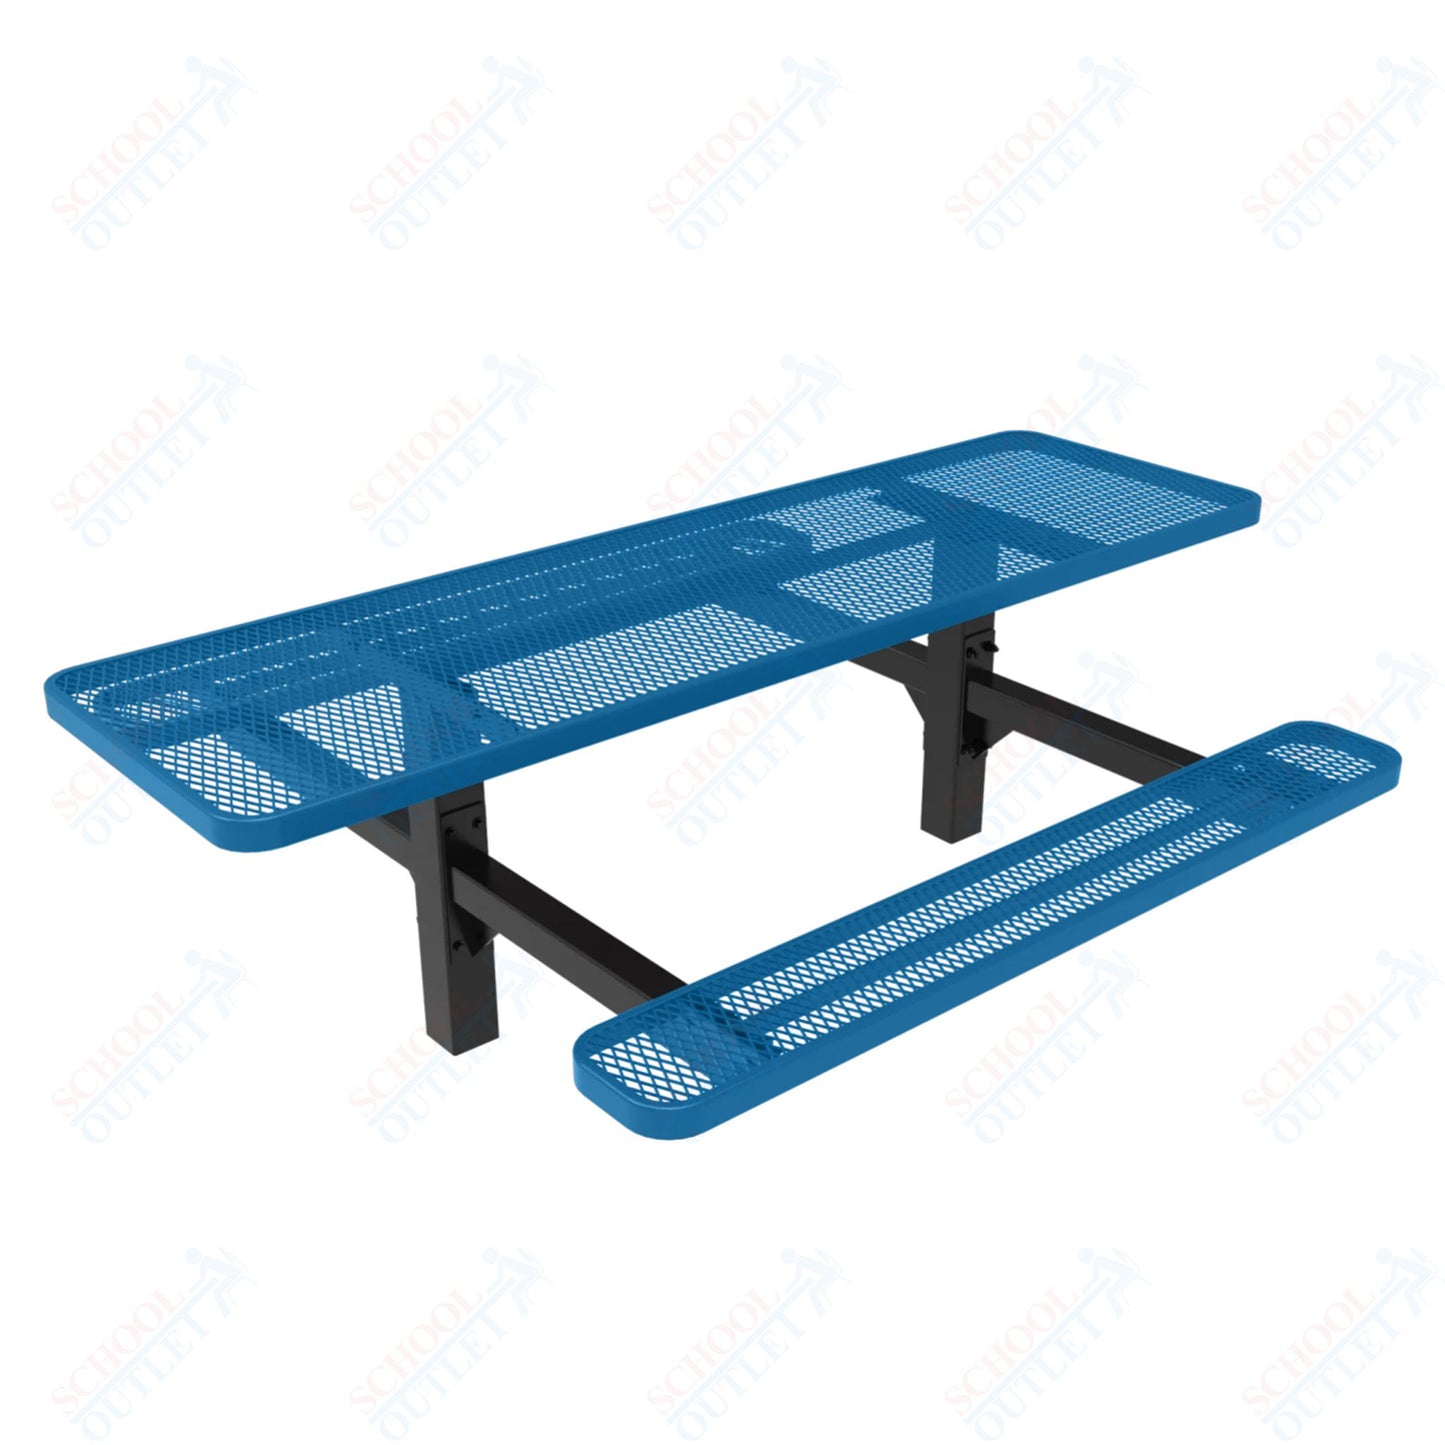 MyTcoat MYT-TRT08-08-002 8' Rectangular Double Pedestal Picnic Table with Inground Mount and Alternate ADA Accessible (96"W x 75.5"D x 30"H)